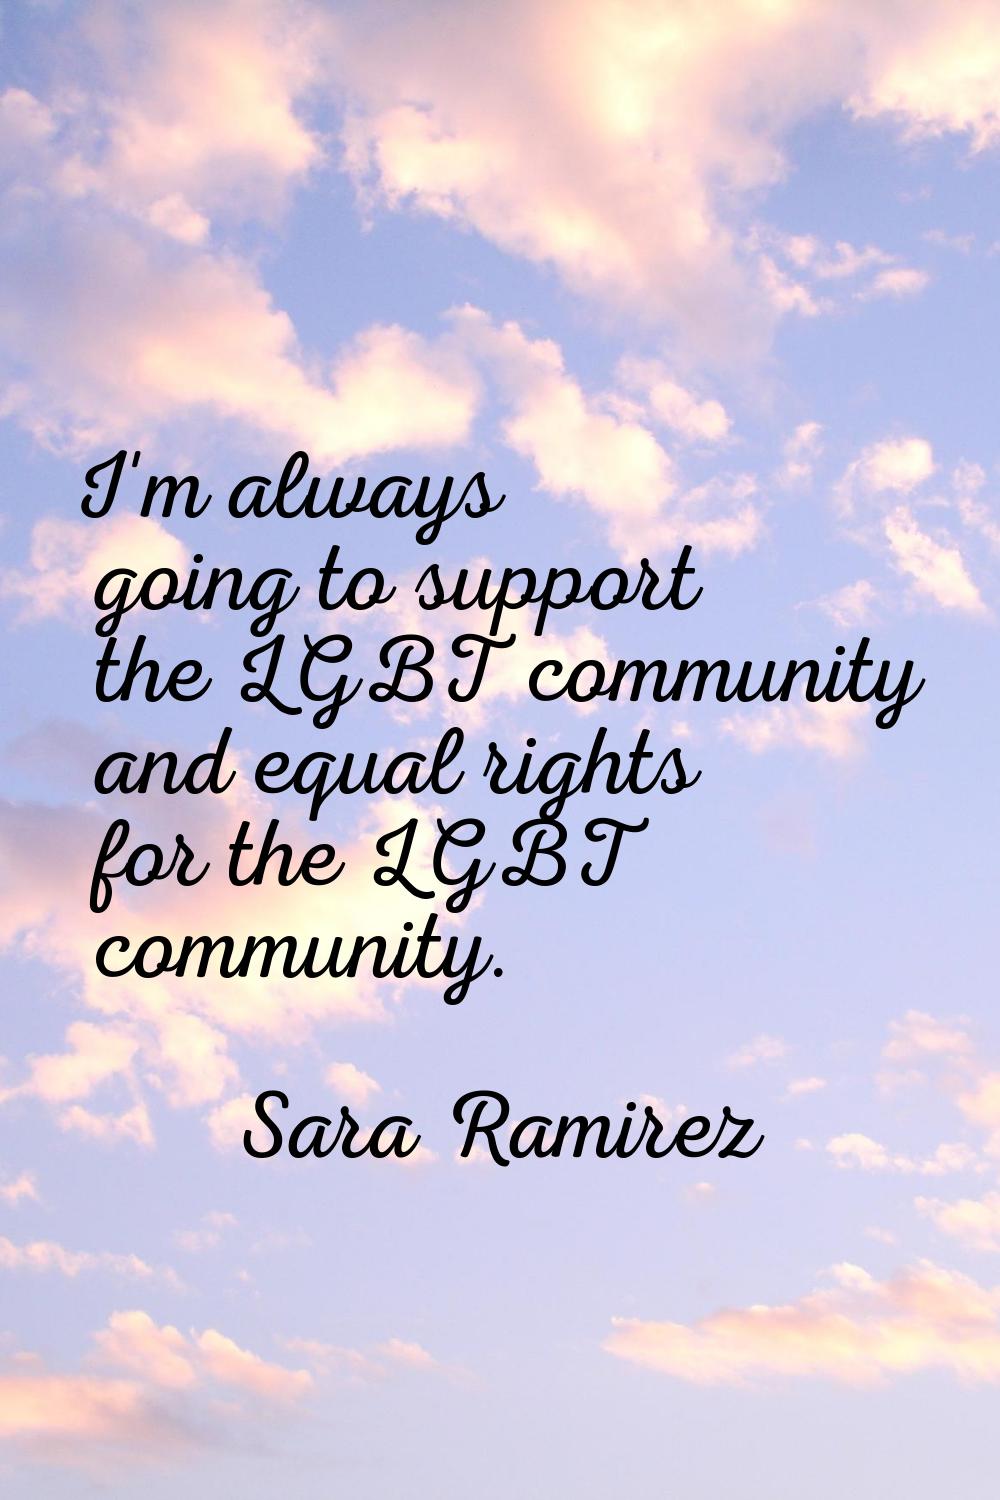 I'm always going to support the LGBT community and equal rights for the LGBT community.